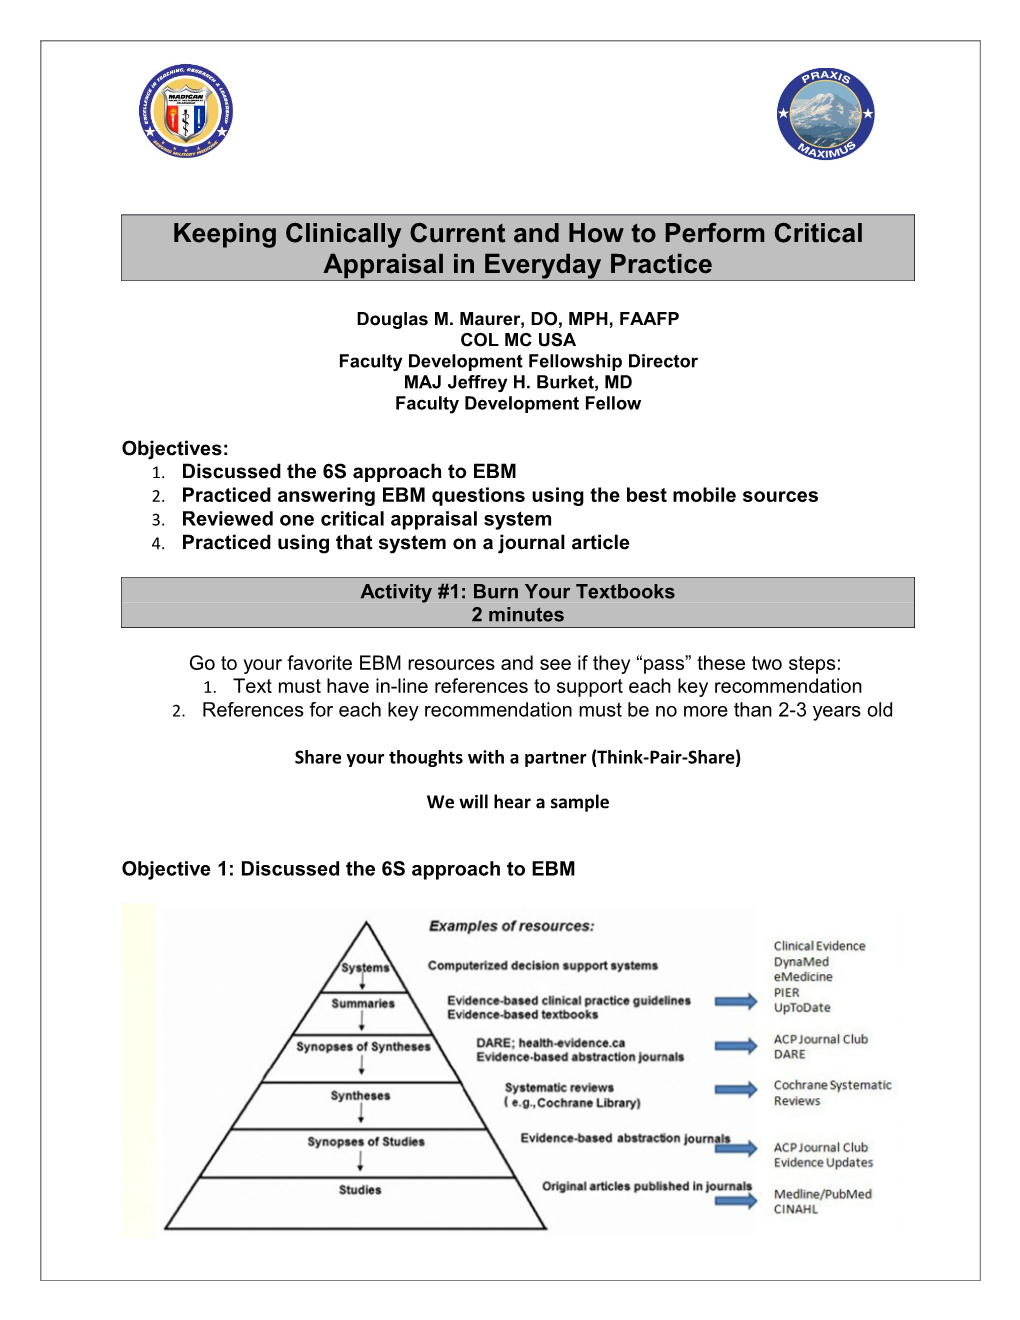 Keeping Clinically Current and How to Perform Critical Appraisal in Everyday Practice